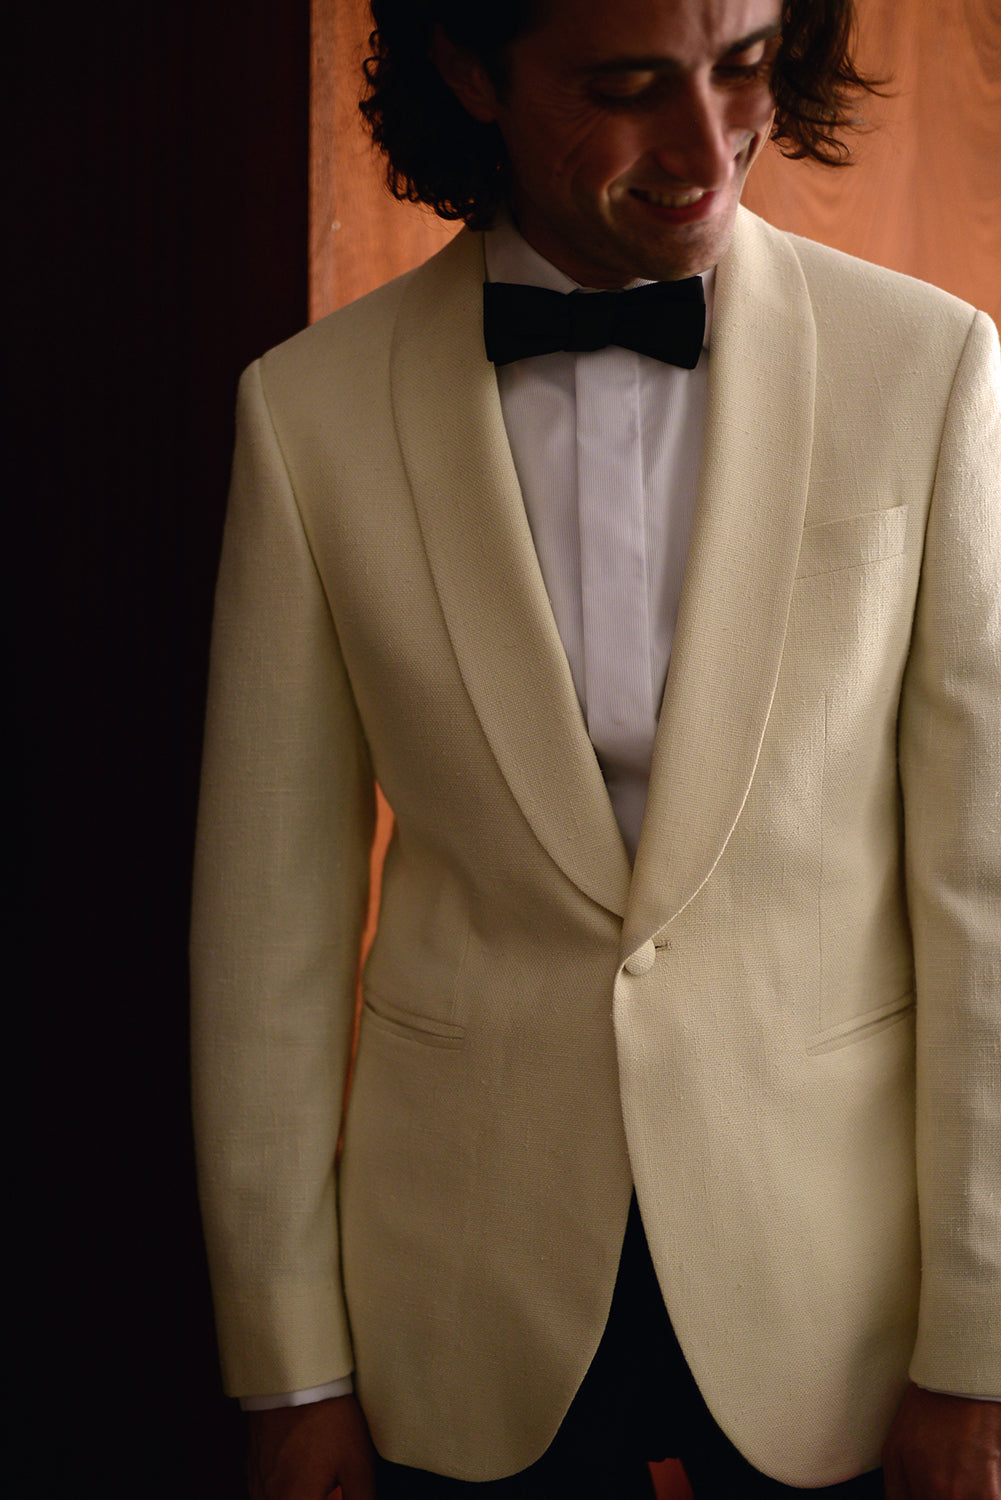 Brooklyn Tailors BKT50 Shawl Collar Dinner Jacket in Silk & Wool Hopsack - Ivory on-body shot. Model is wearing the jacket with a white tux shirt and black bowtie